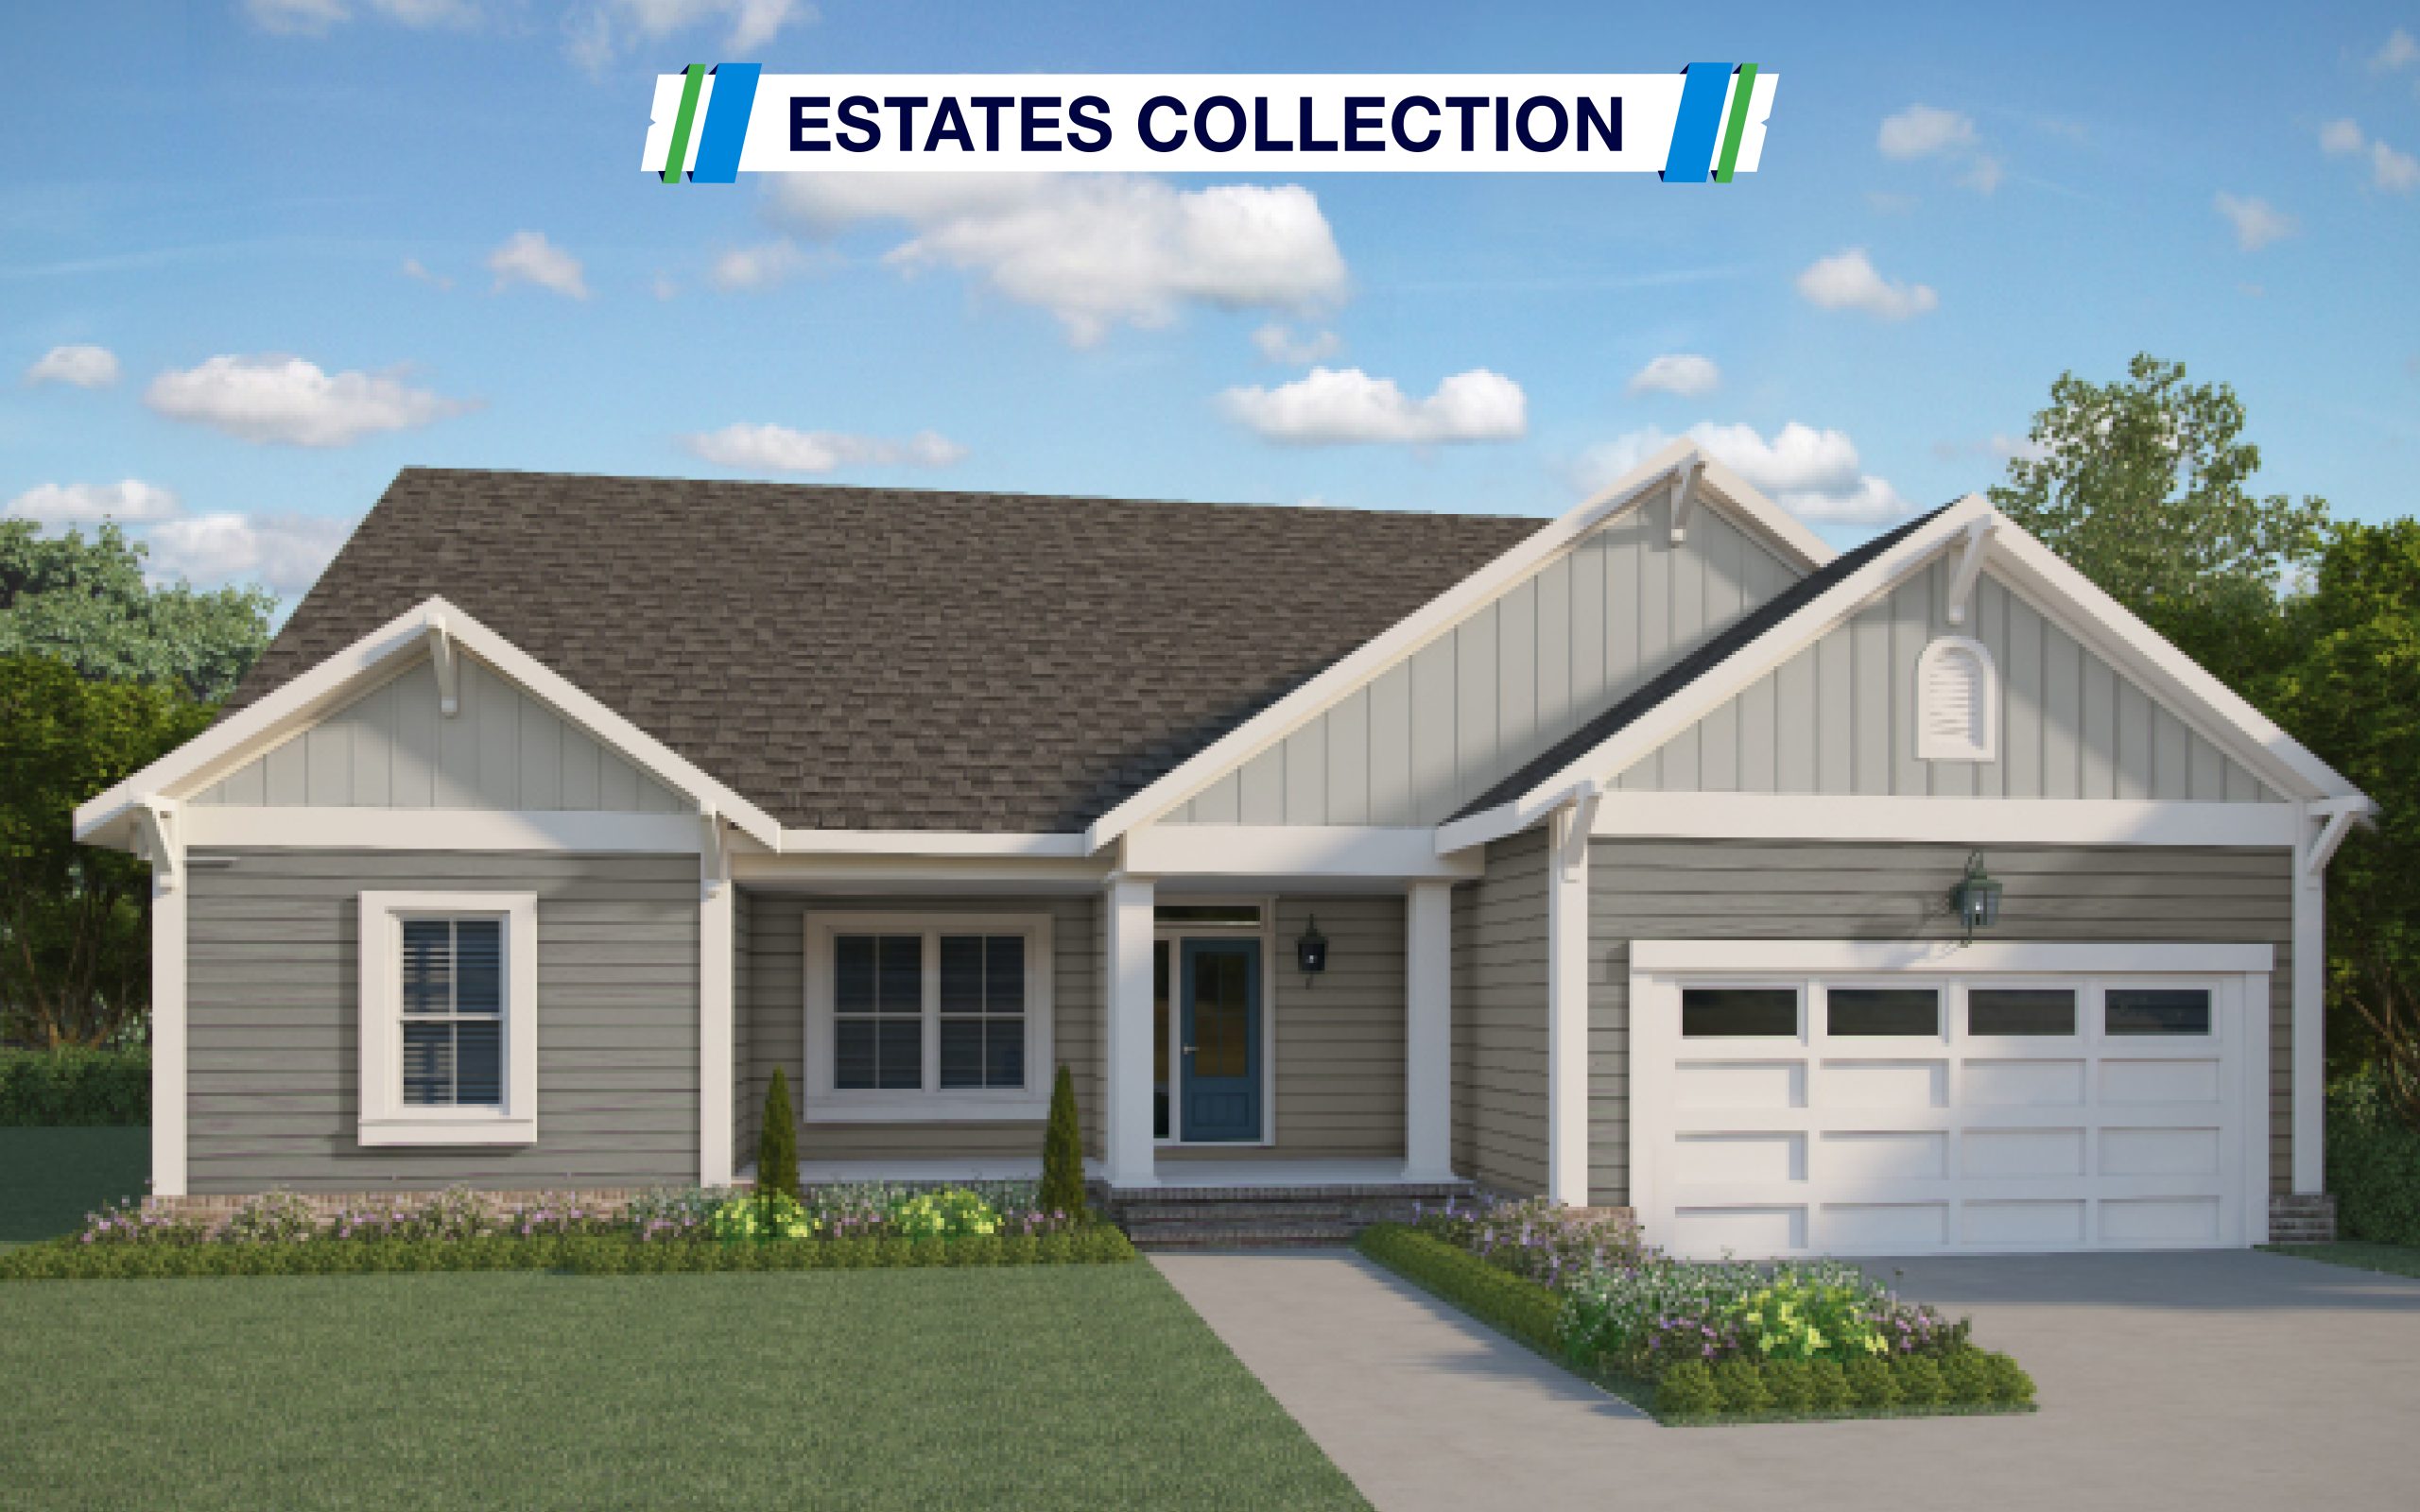 Image of the Marino Model - the Estates Collection. One story home . Image shows the front porch, garage and three windows.